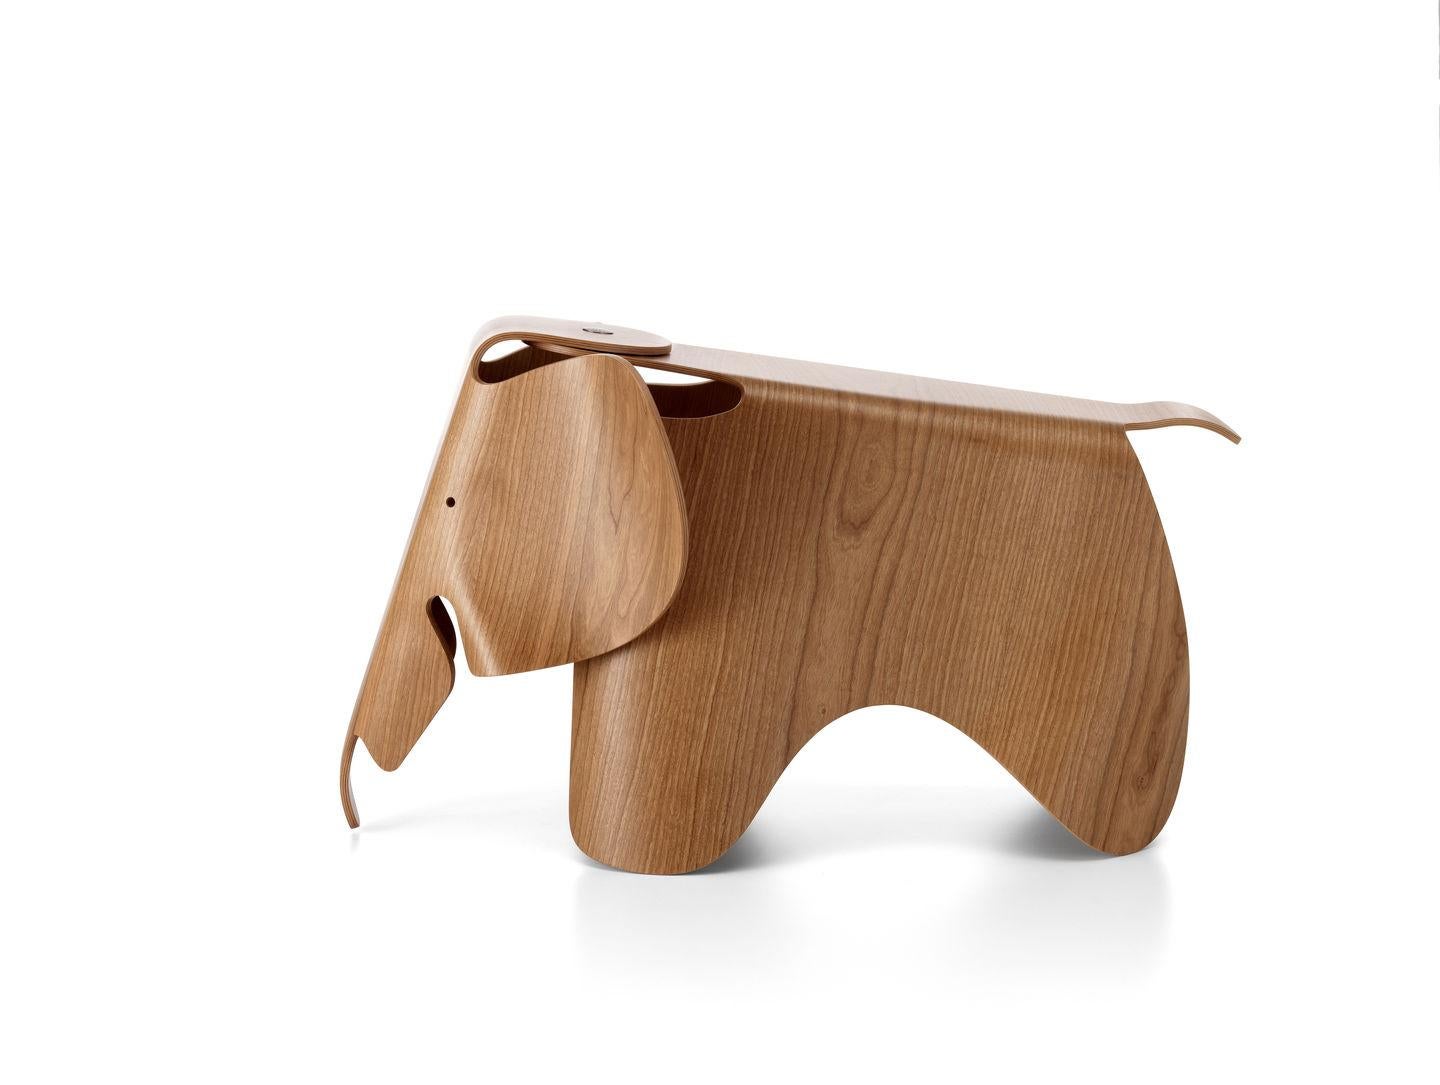 These items are currently only available in the United States.

Charles and Ray Eames developed a toy elephant made of plywood in 1945; however, this piece never went into production. One prototype was shown at the Museum of Modern Art in New York